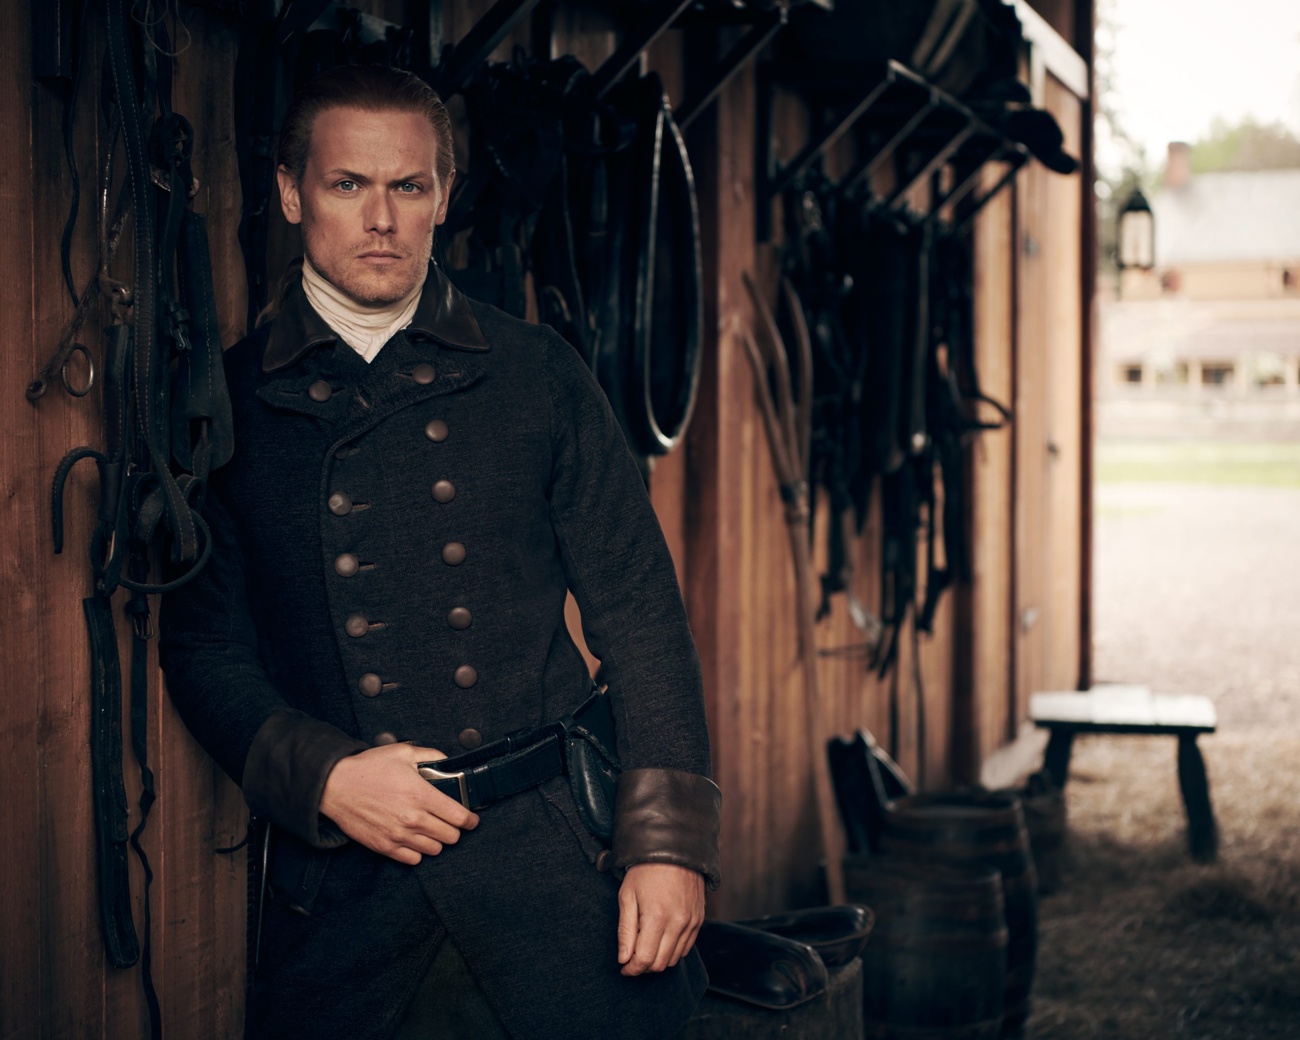 Sam Heughan has shared some of his worst moments filming the series.